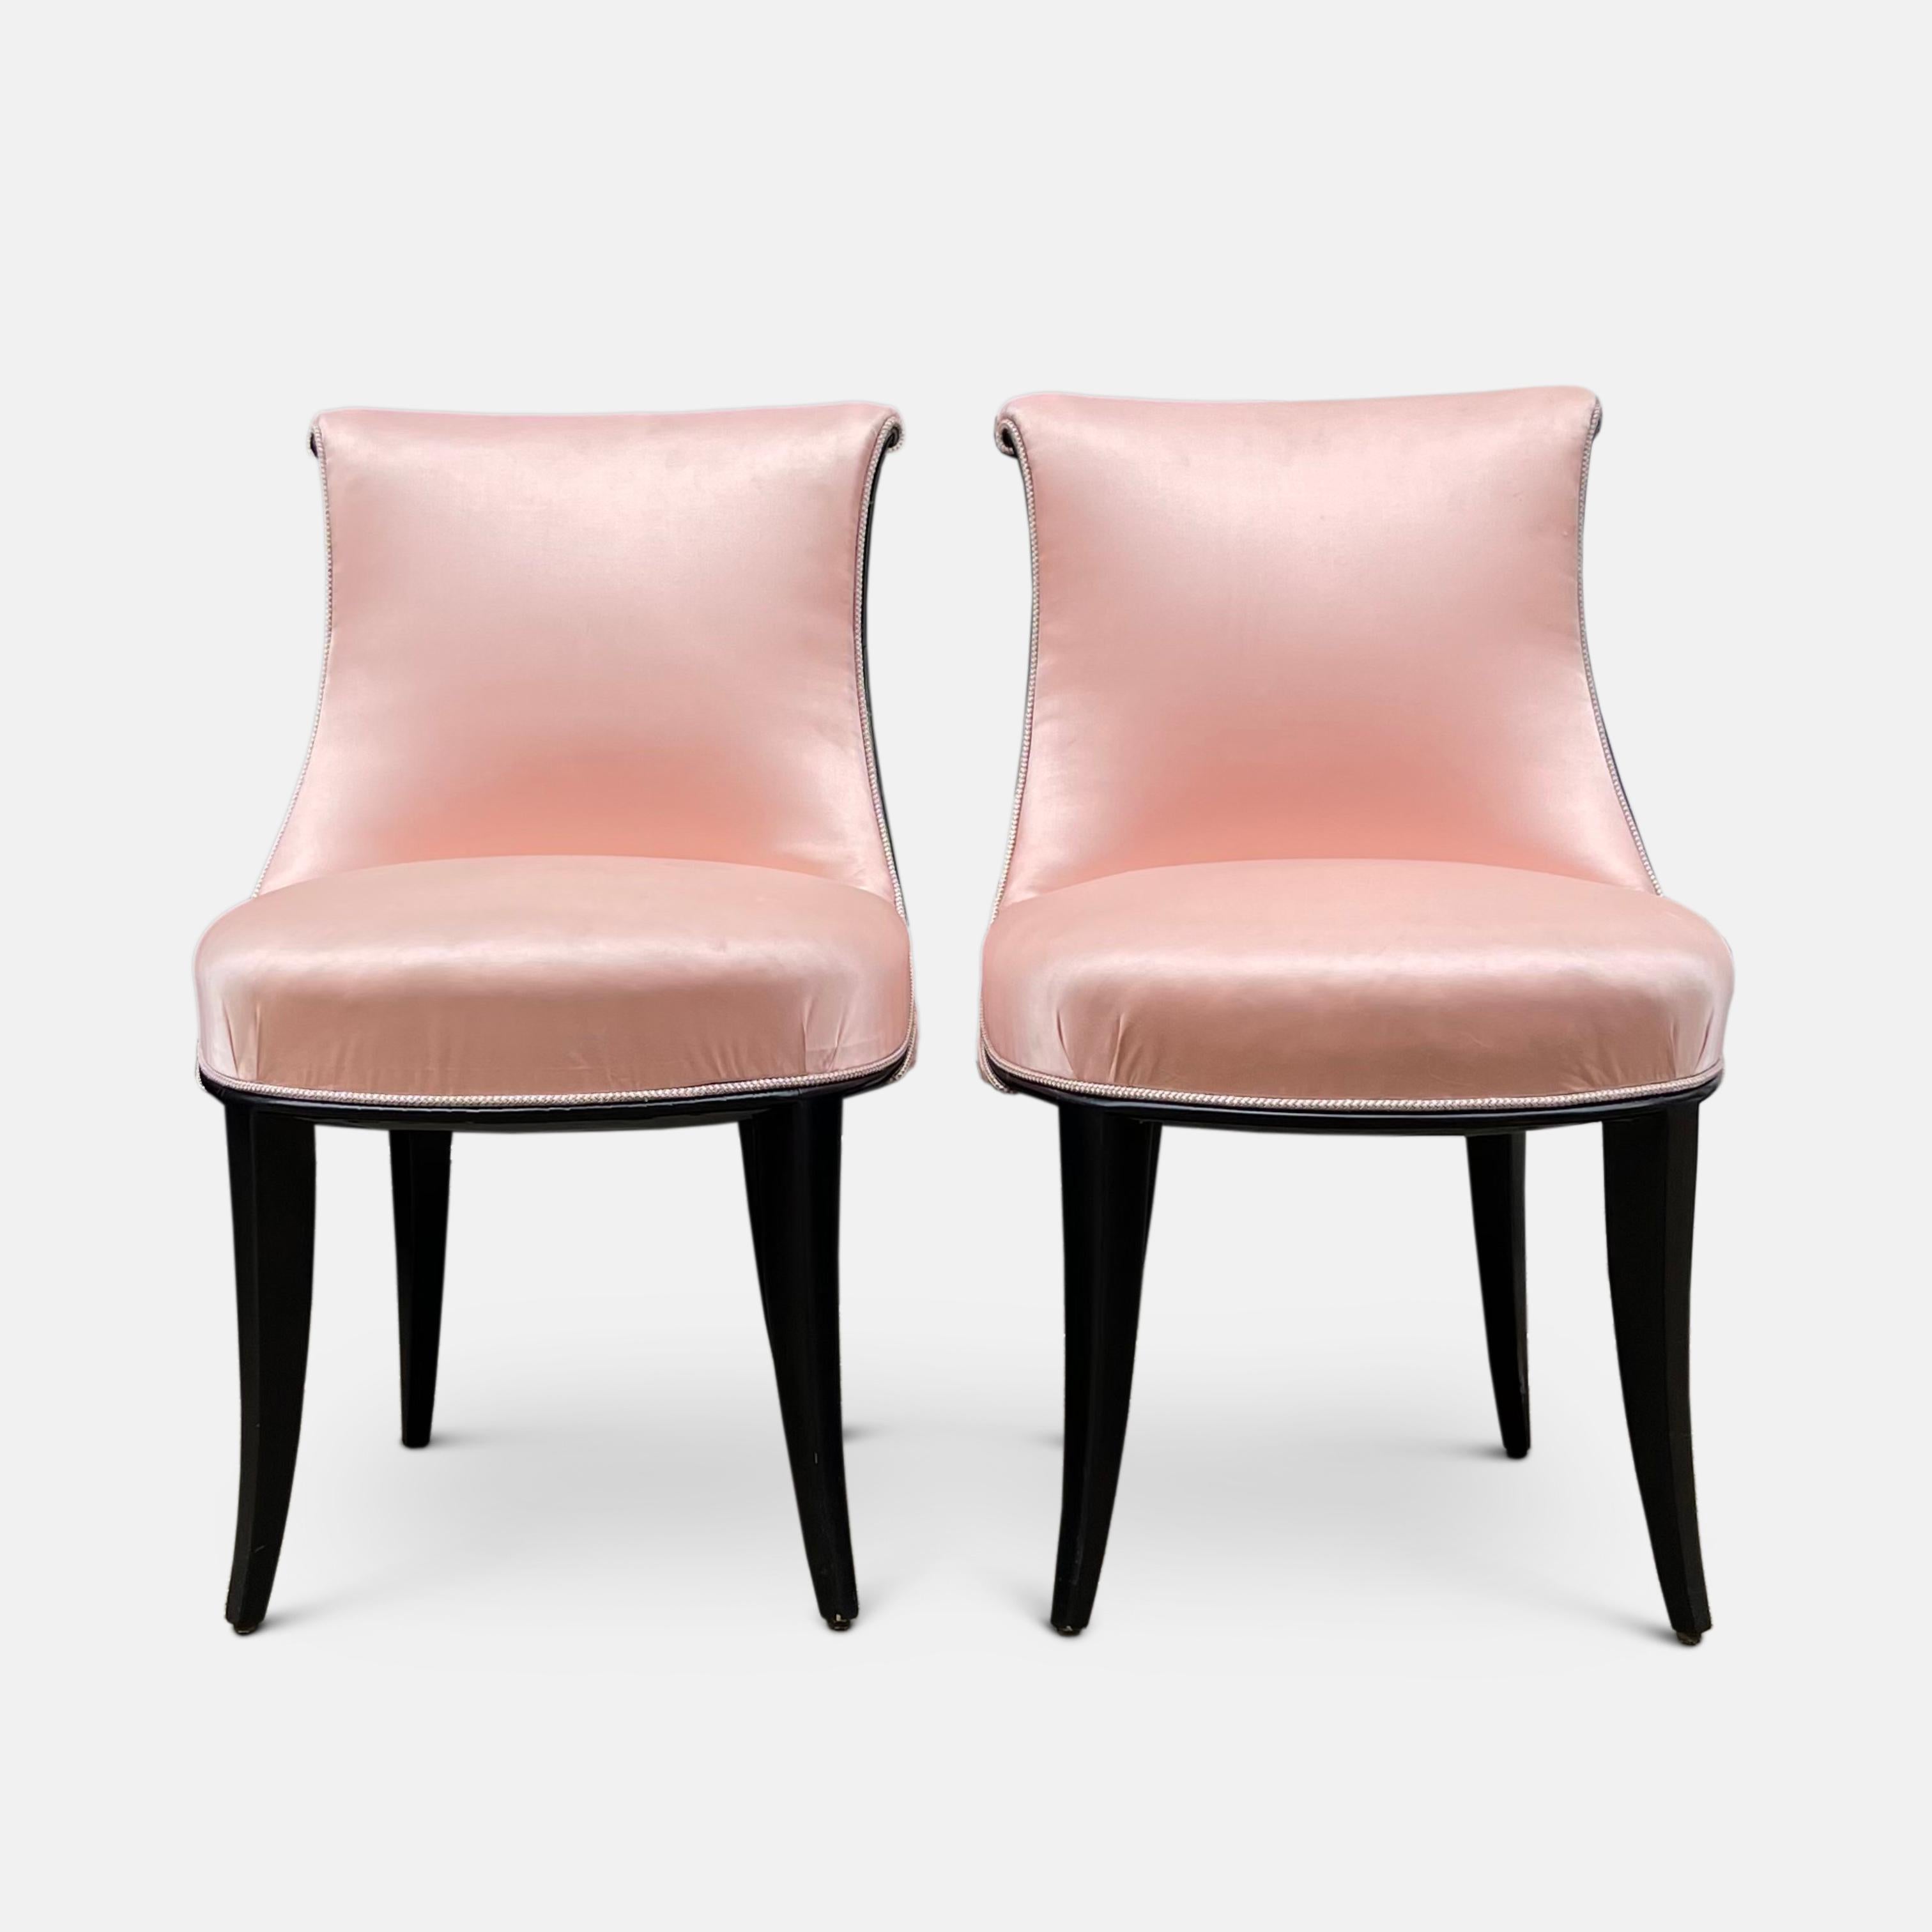 A pair of 1940’s French ebonised side chairs with an open pleated back finished in light pink satin and braid. 

Dimensions:H 77 cm height D 46cm, W 50cm, Seat Height 45 cm

Condition: In very good original state, very minor bowling to satin on one